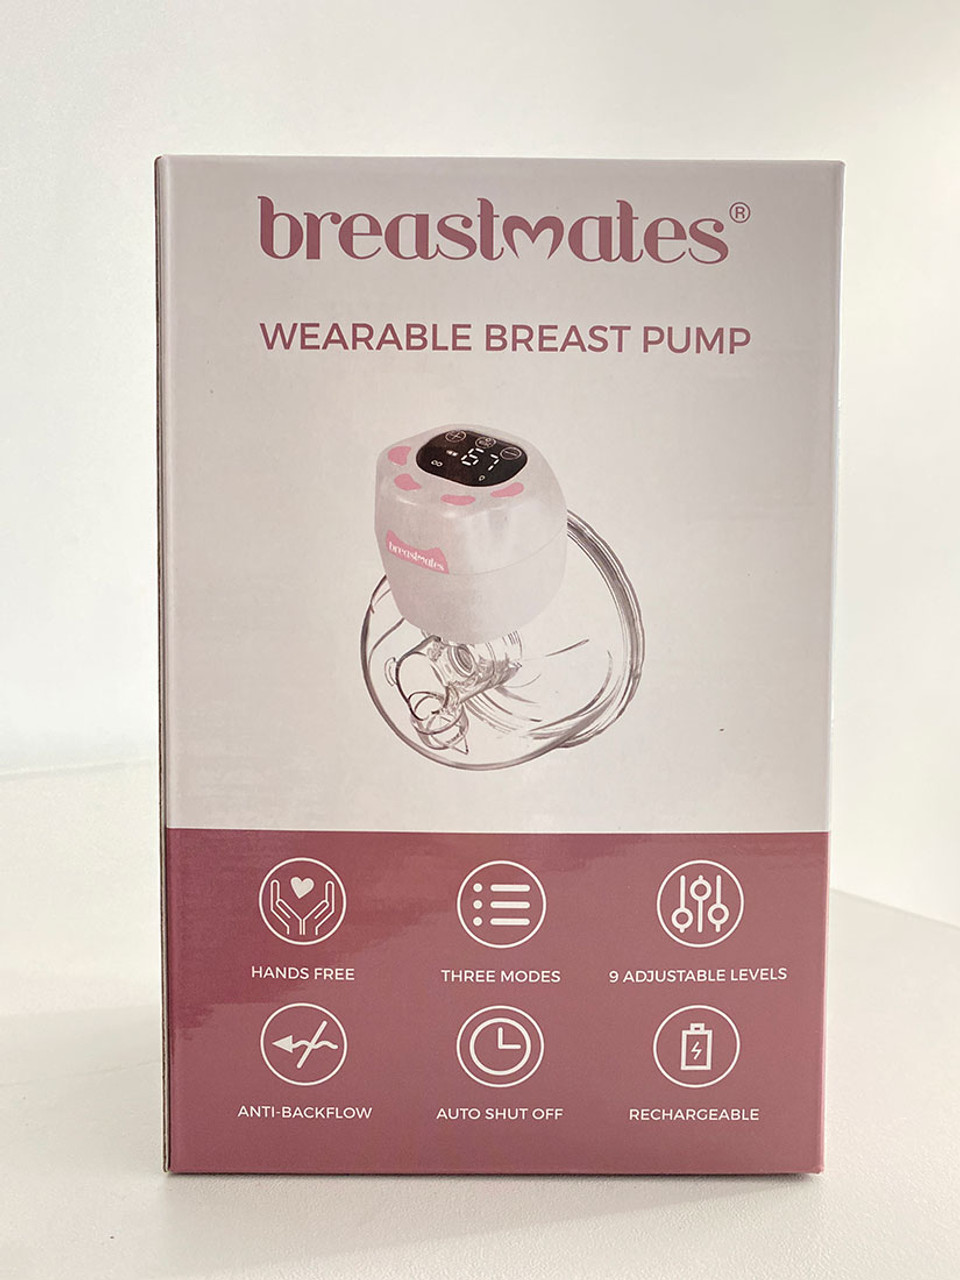 Wearable Breast Pump - budget friendly and quality pump - Breastmates